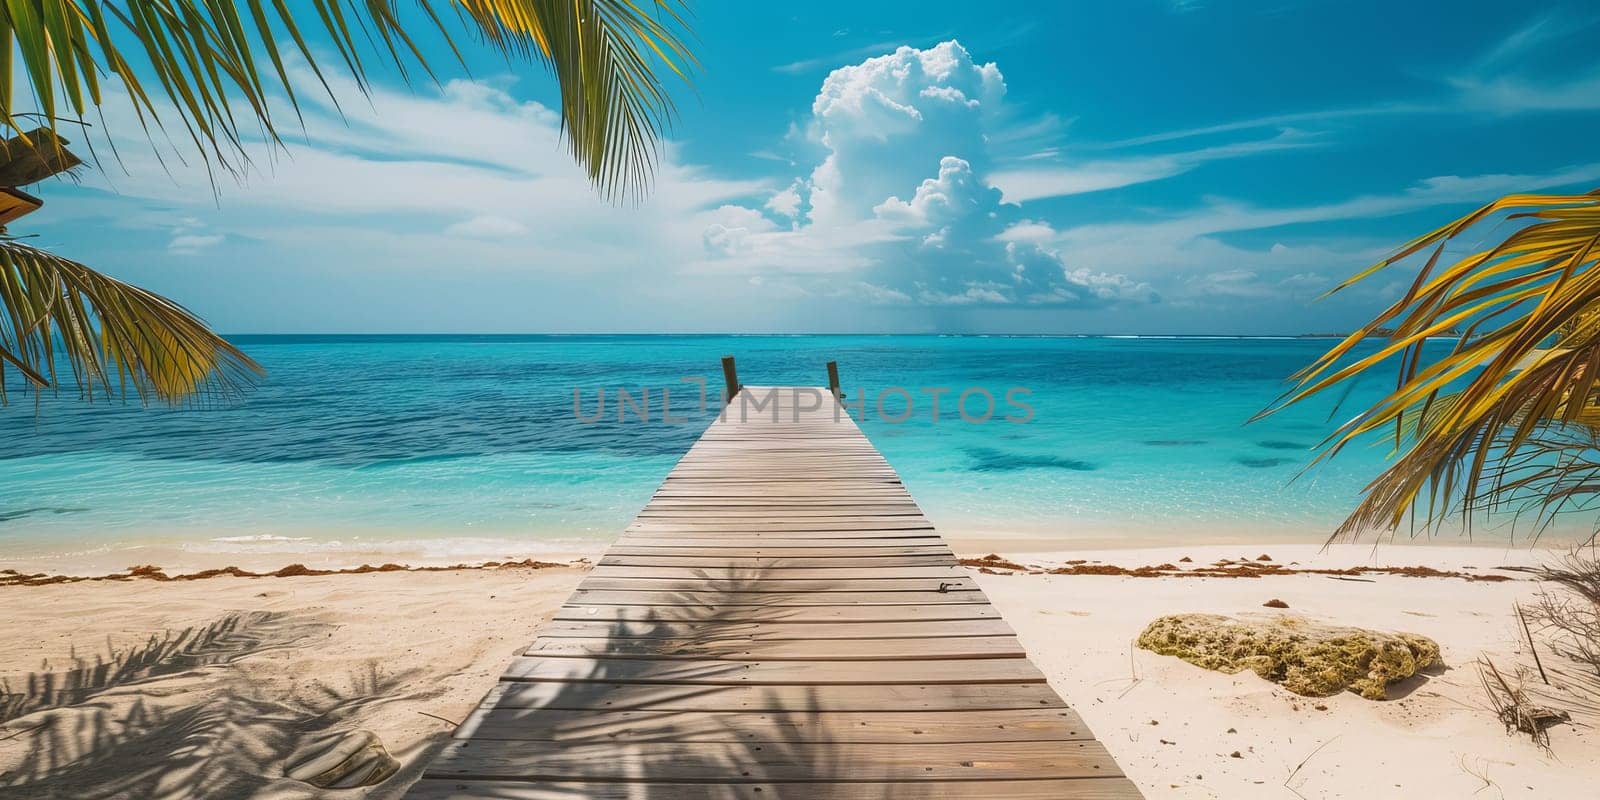 Wooden pier on tropical beach with palm trees, blue sky and white sand by ailike